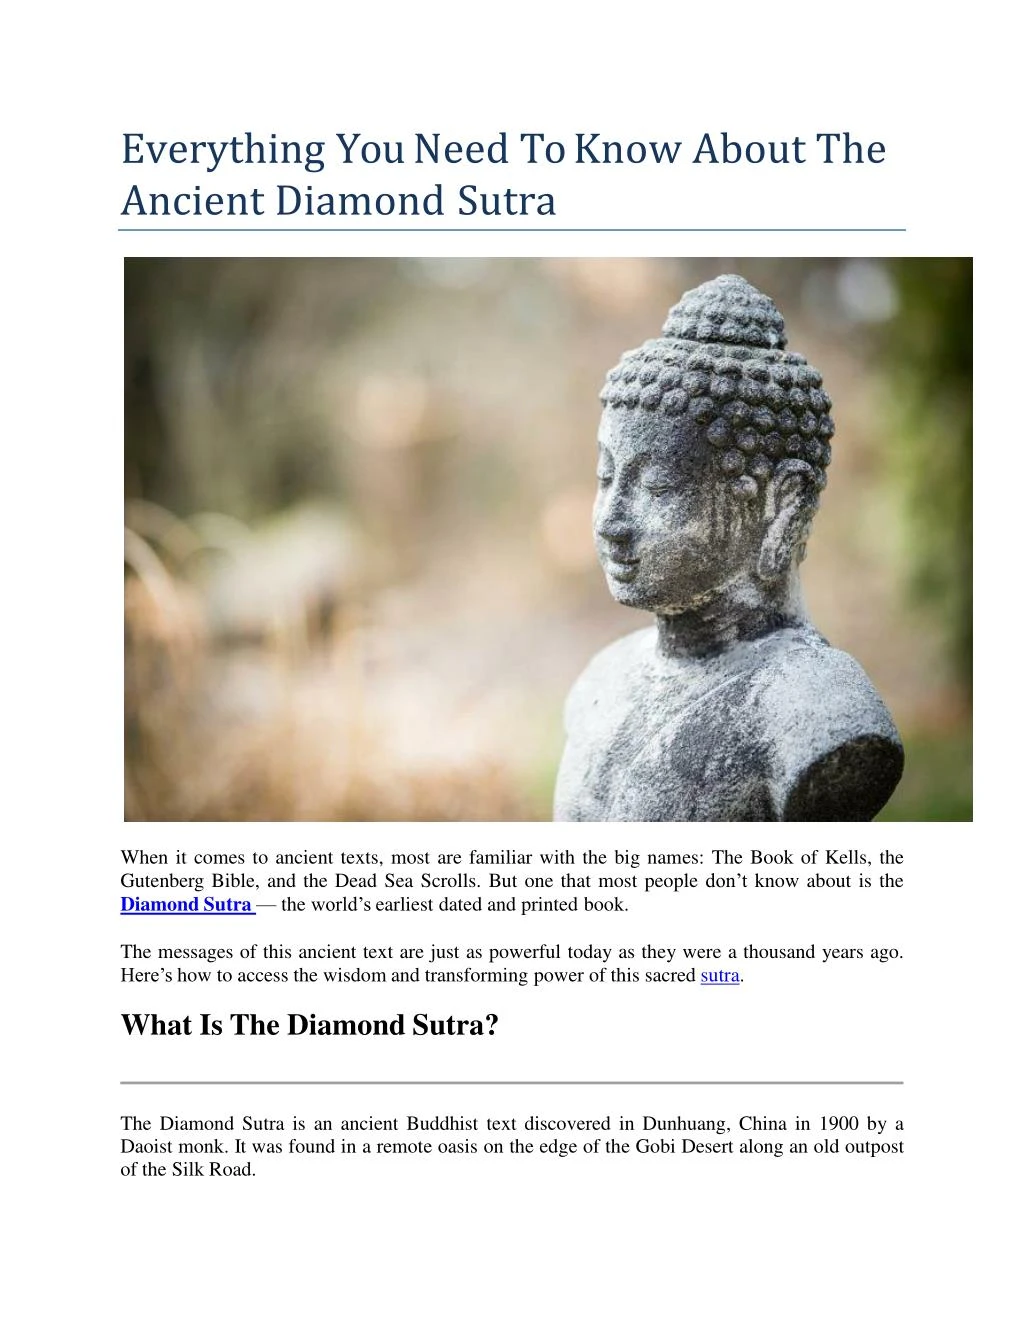 everything you need to know about the ancient diamond sutra